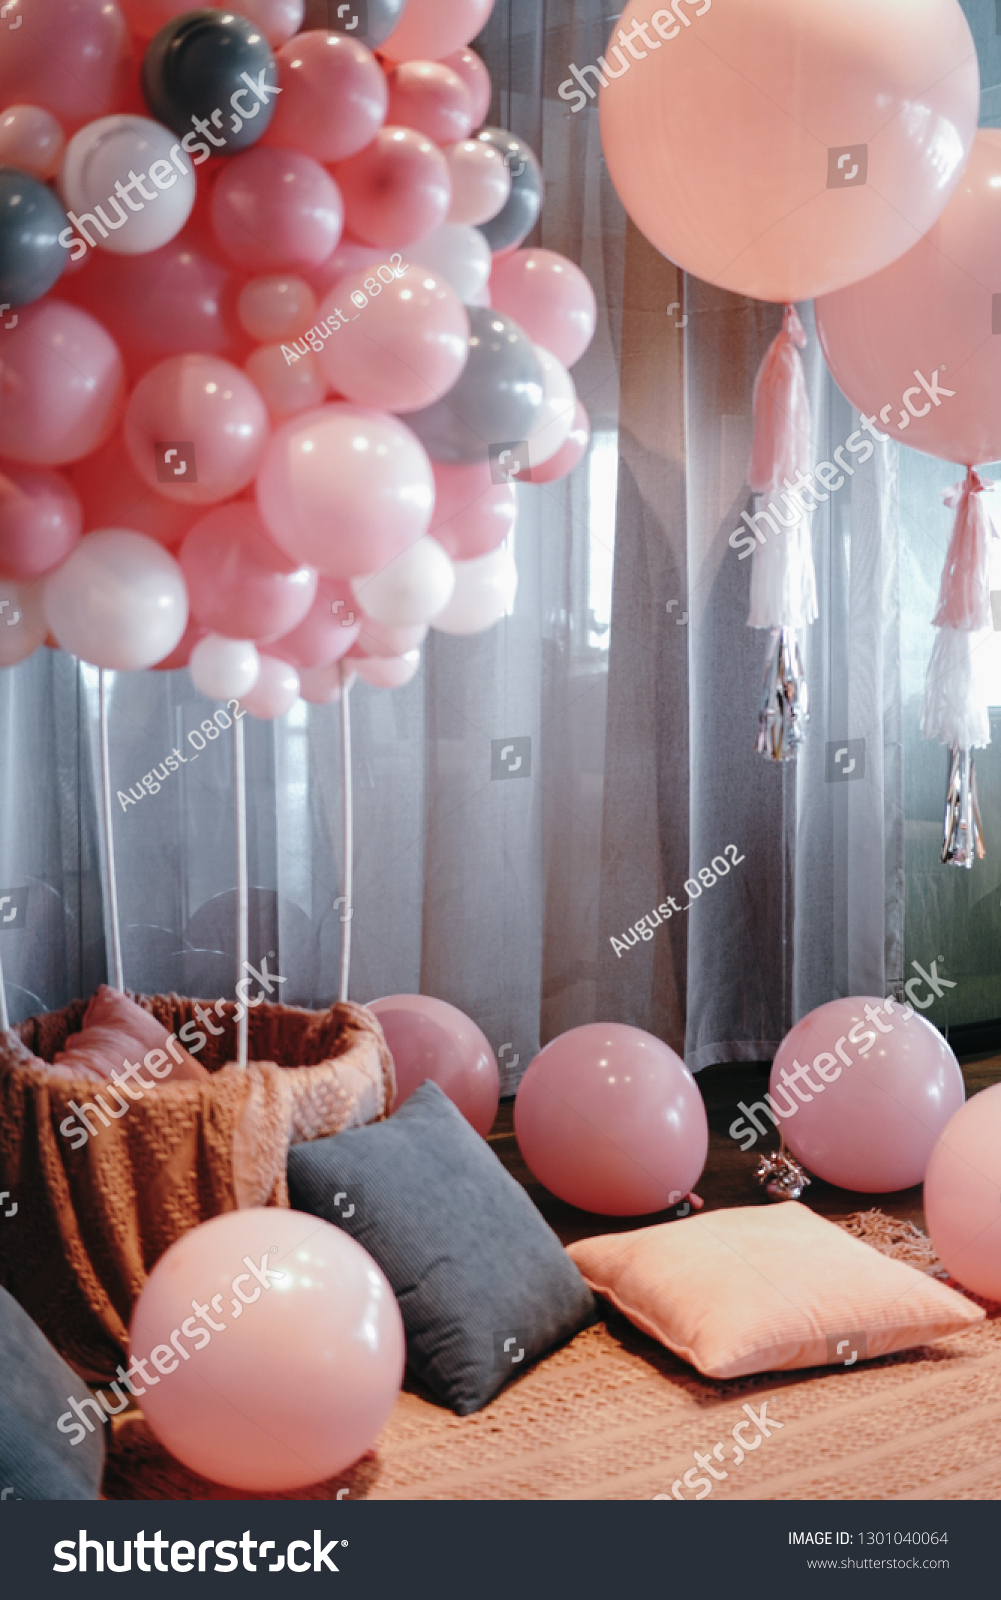 Many pink balloons and cushions with window screening in the lobby. #1301040064